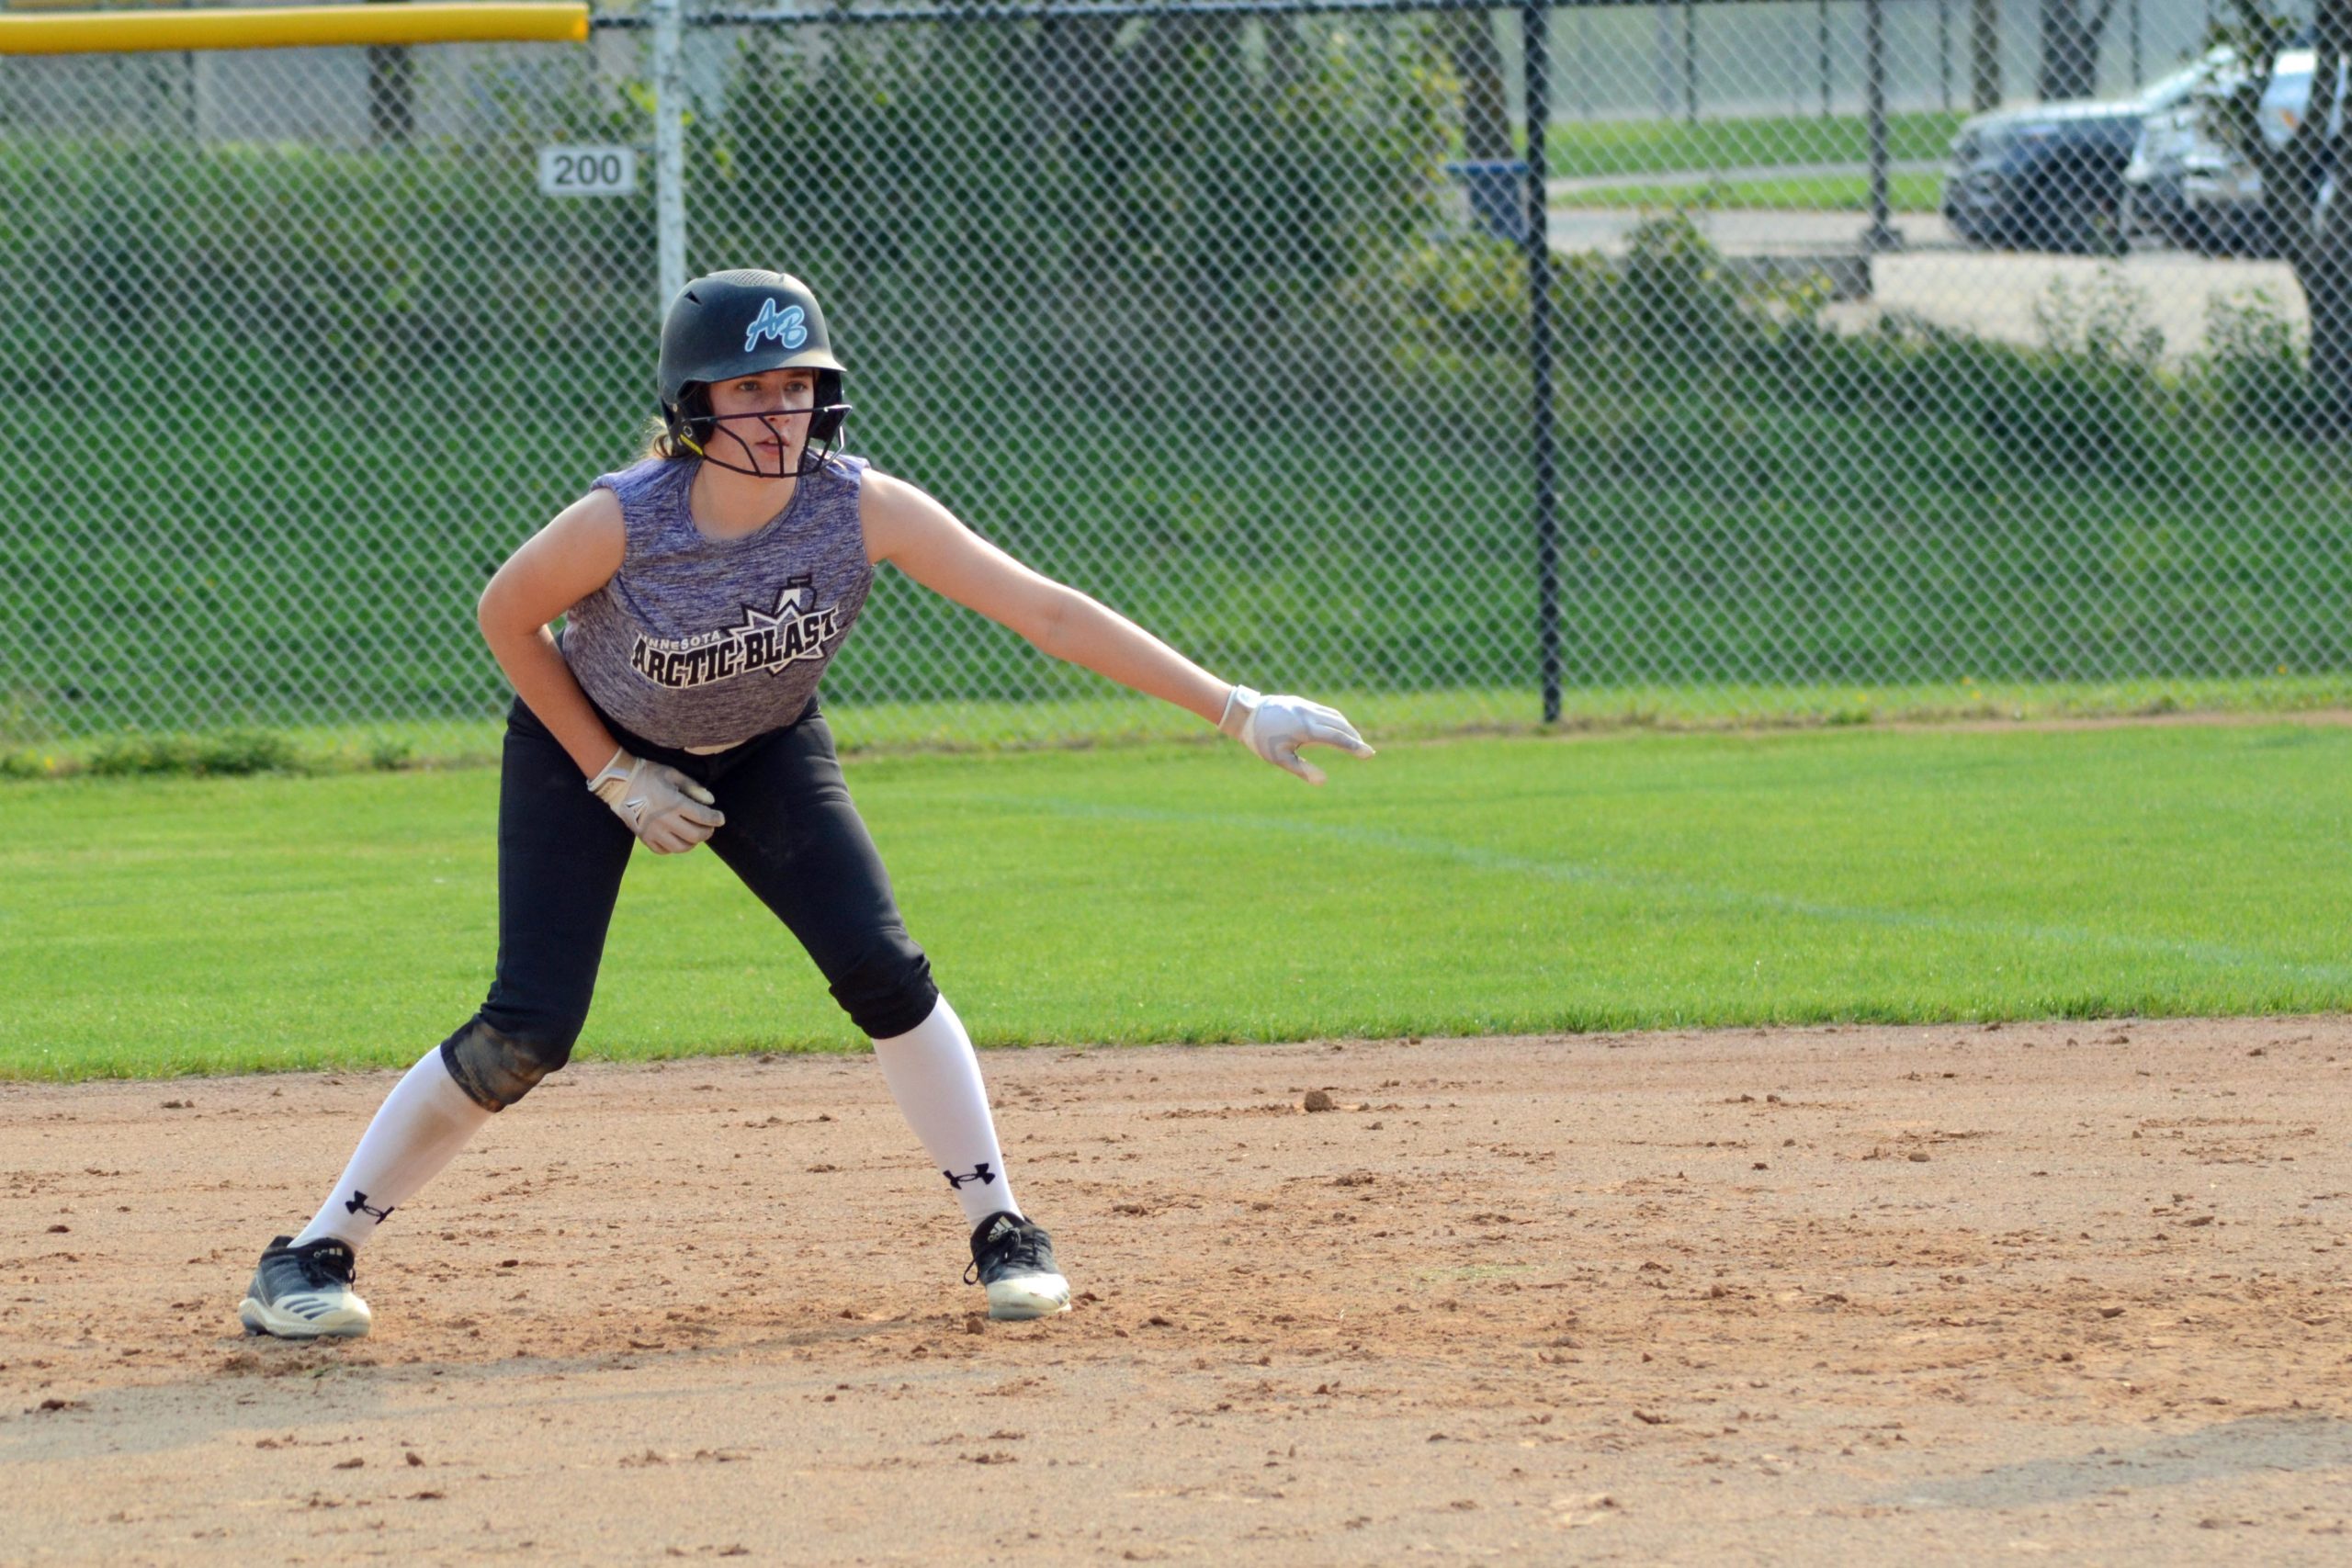 Genna Streed leads off first base during the Mandy Matula Memorial Tournament on Sept. 11, 2021